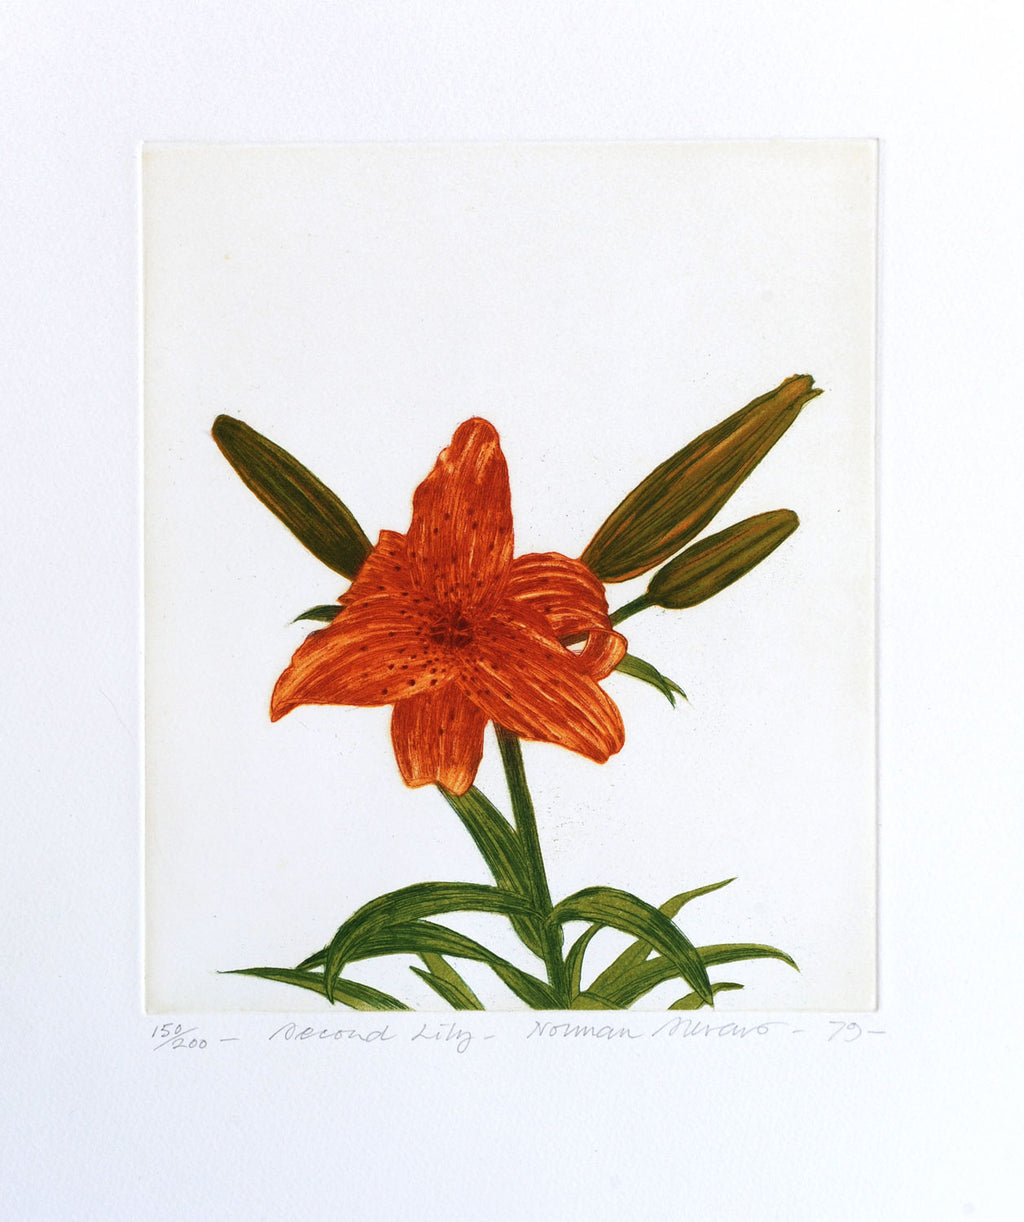 Second Lily